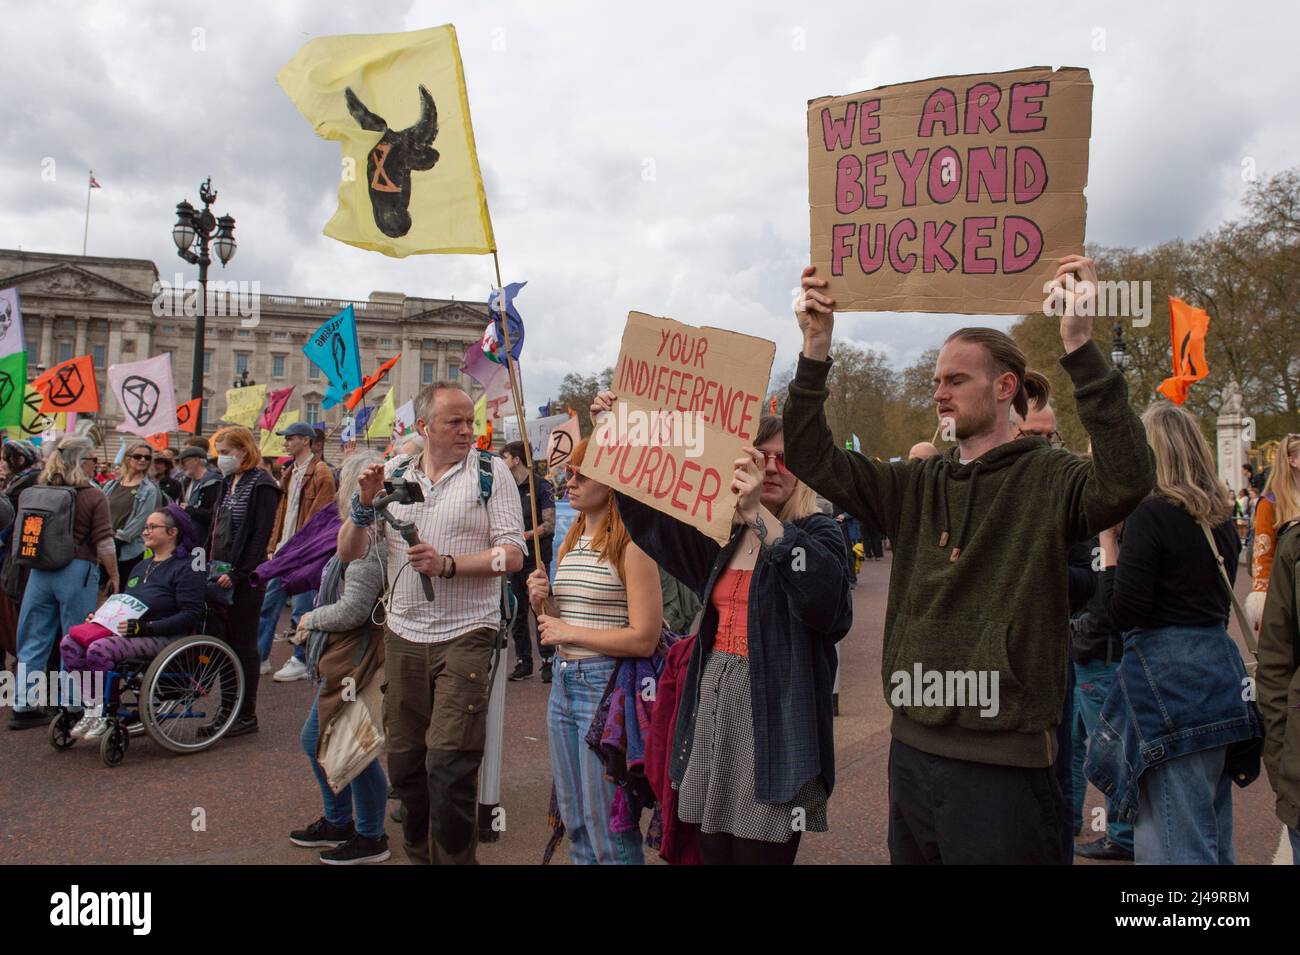 London, UK. 13th Apr, 2022. Climate change demonstraters take part in a march from Hyde Park to Westminster Bridge demanding the government take immediate action to end the UK's reliance on fossil fuels. Credit: claire doherty/Alamy Live News Stock Photo